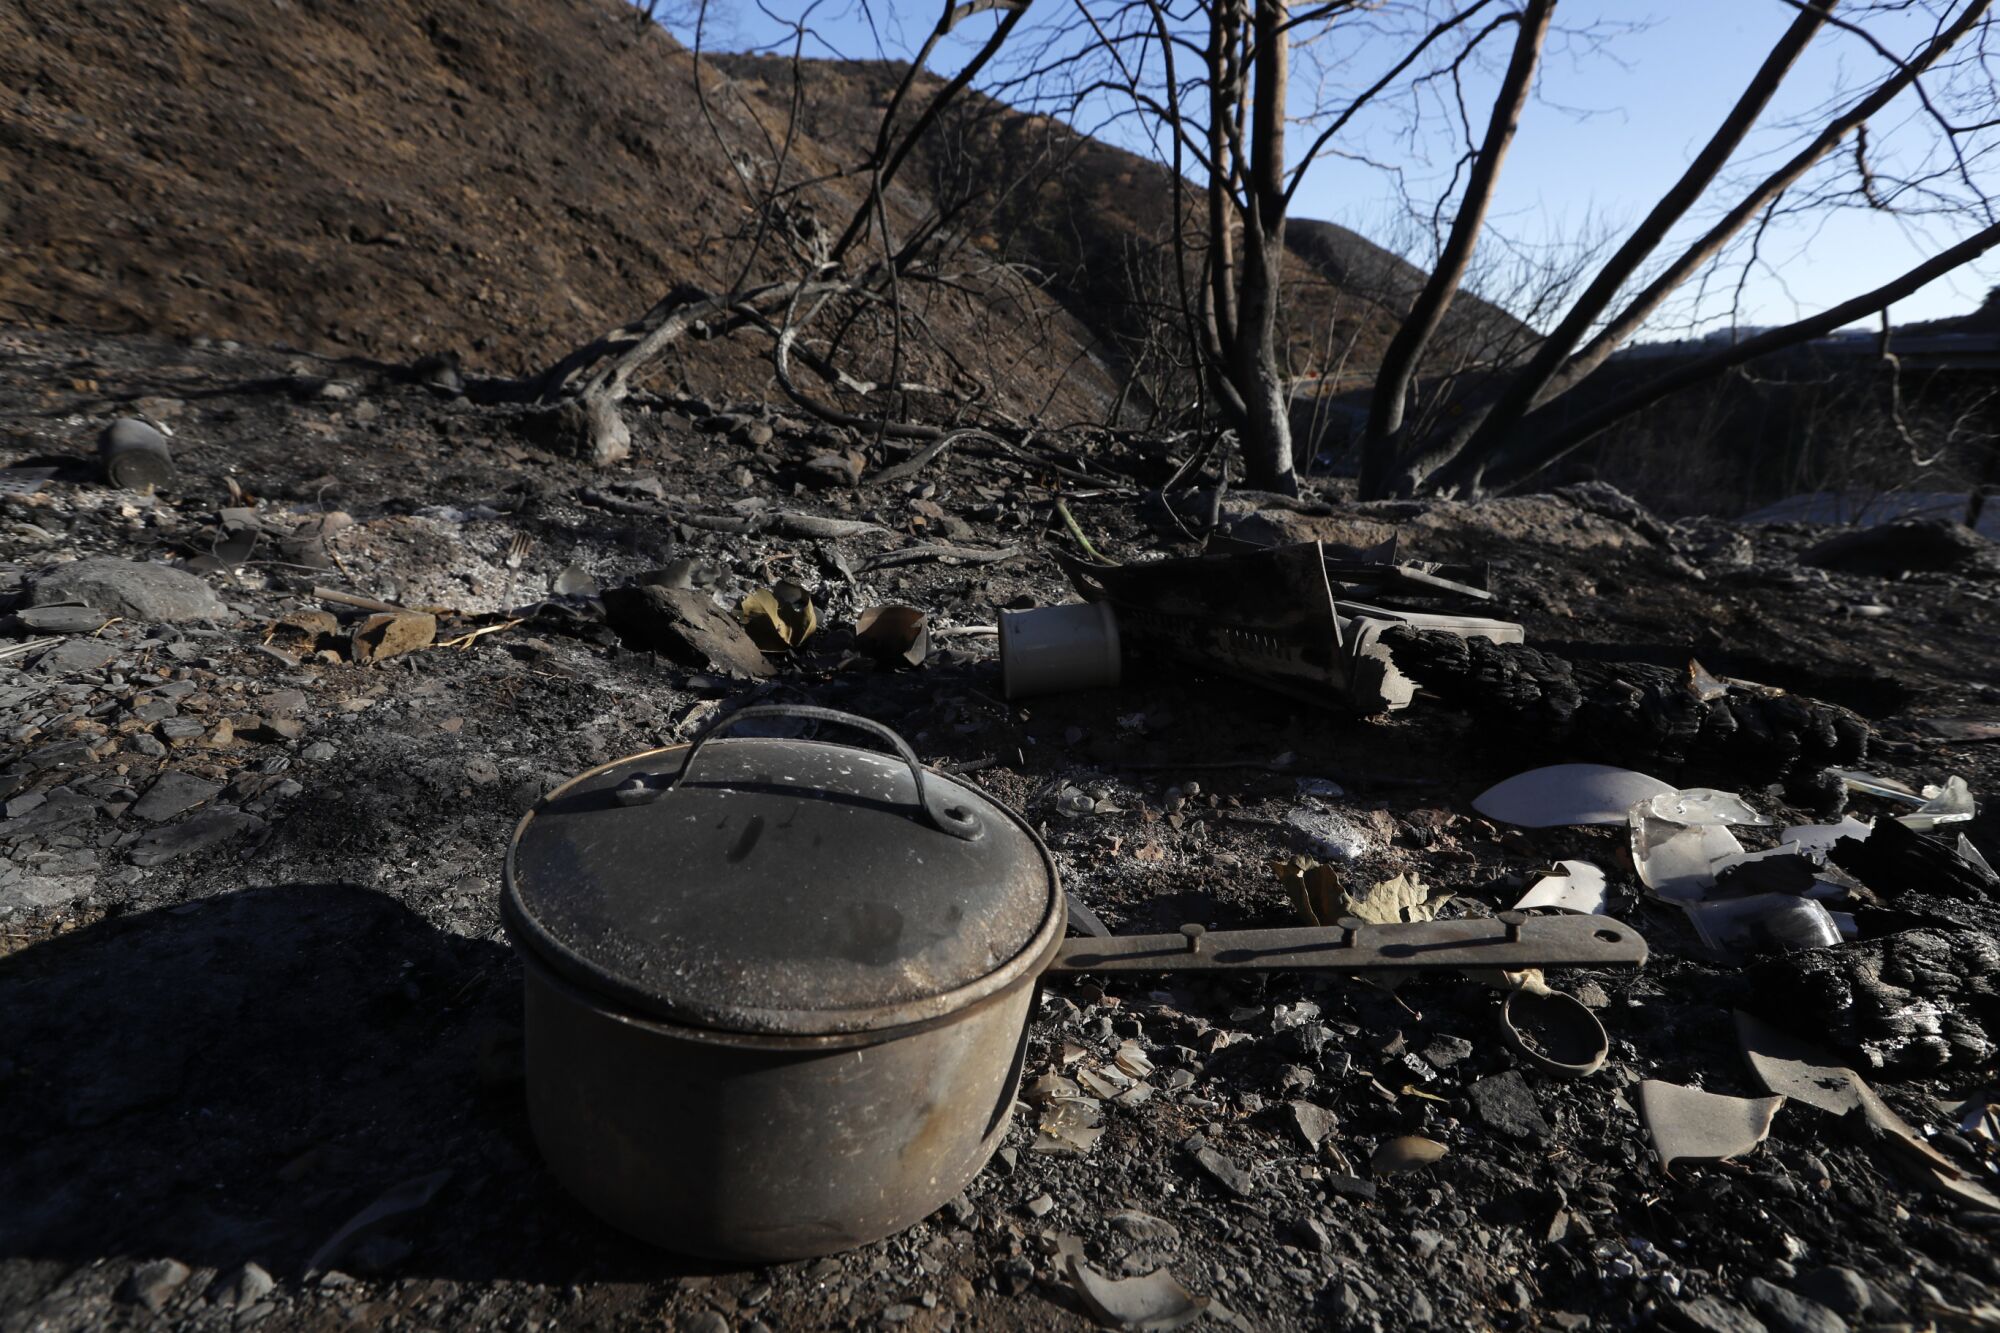 Amid scorched debris, a cooking pot sits in the foreground